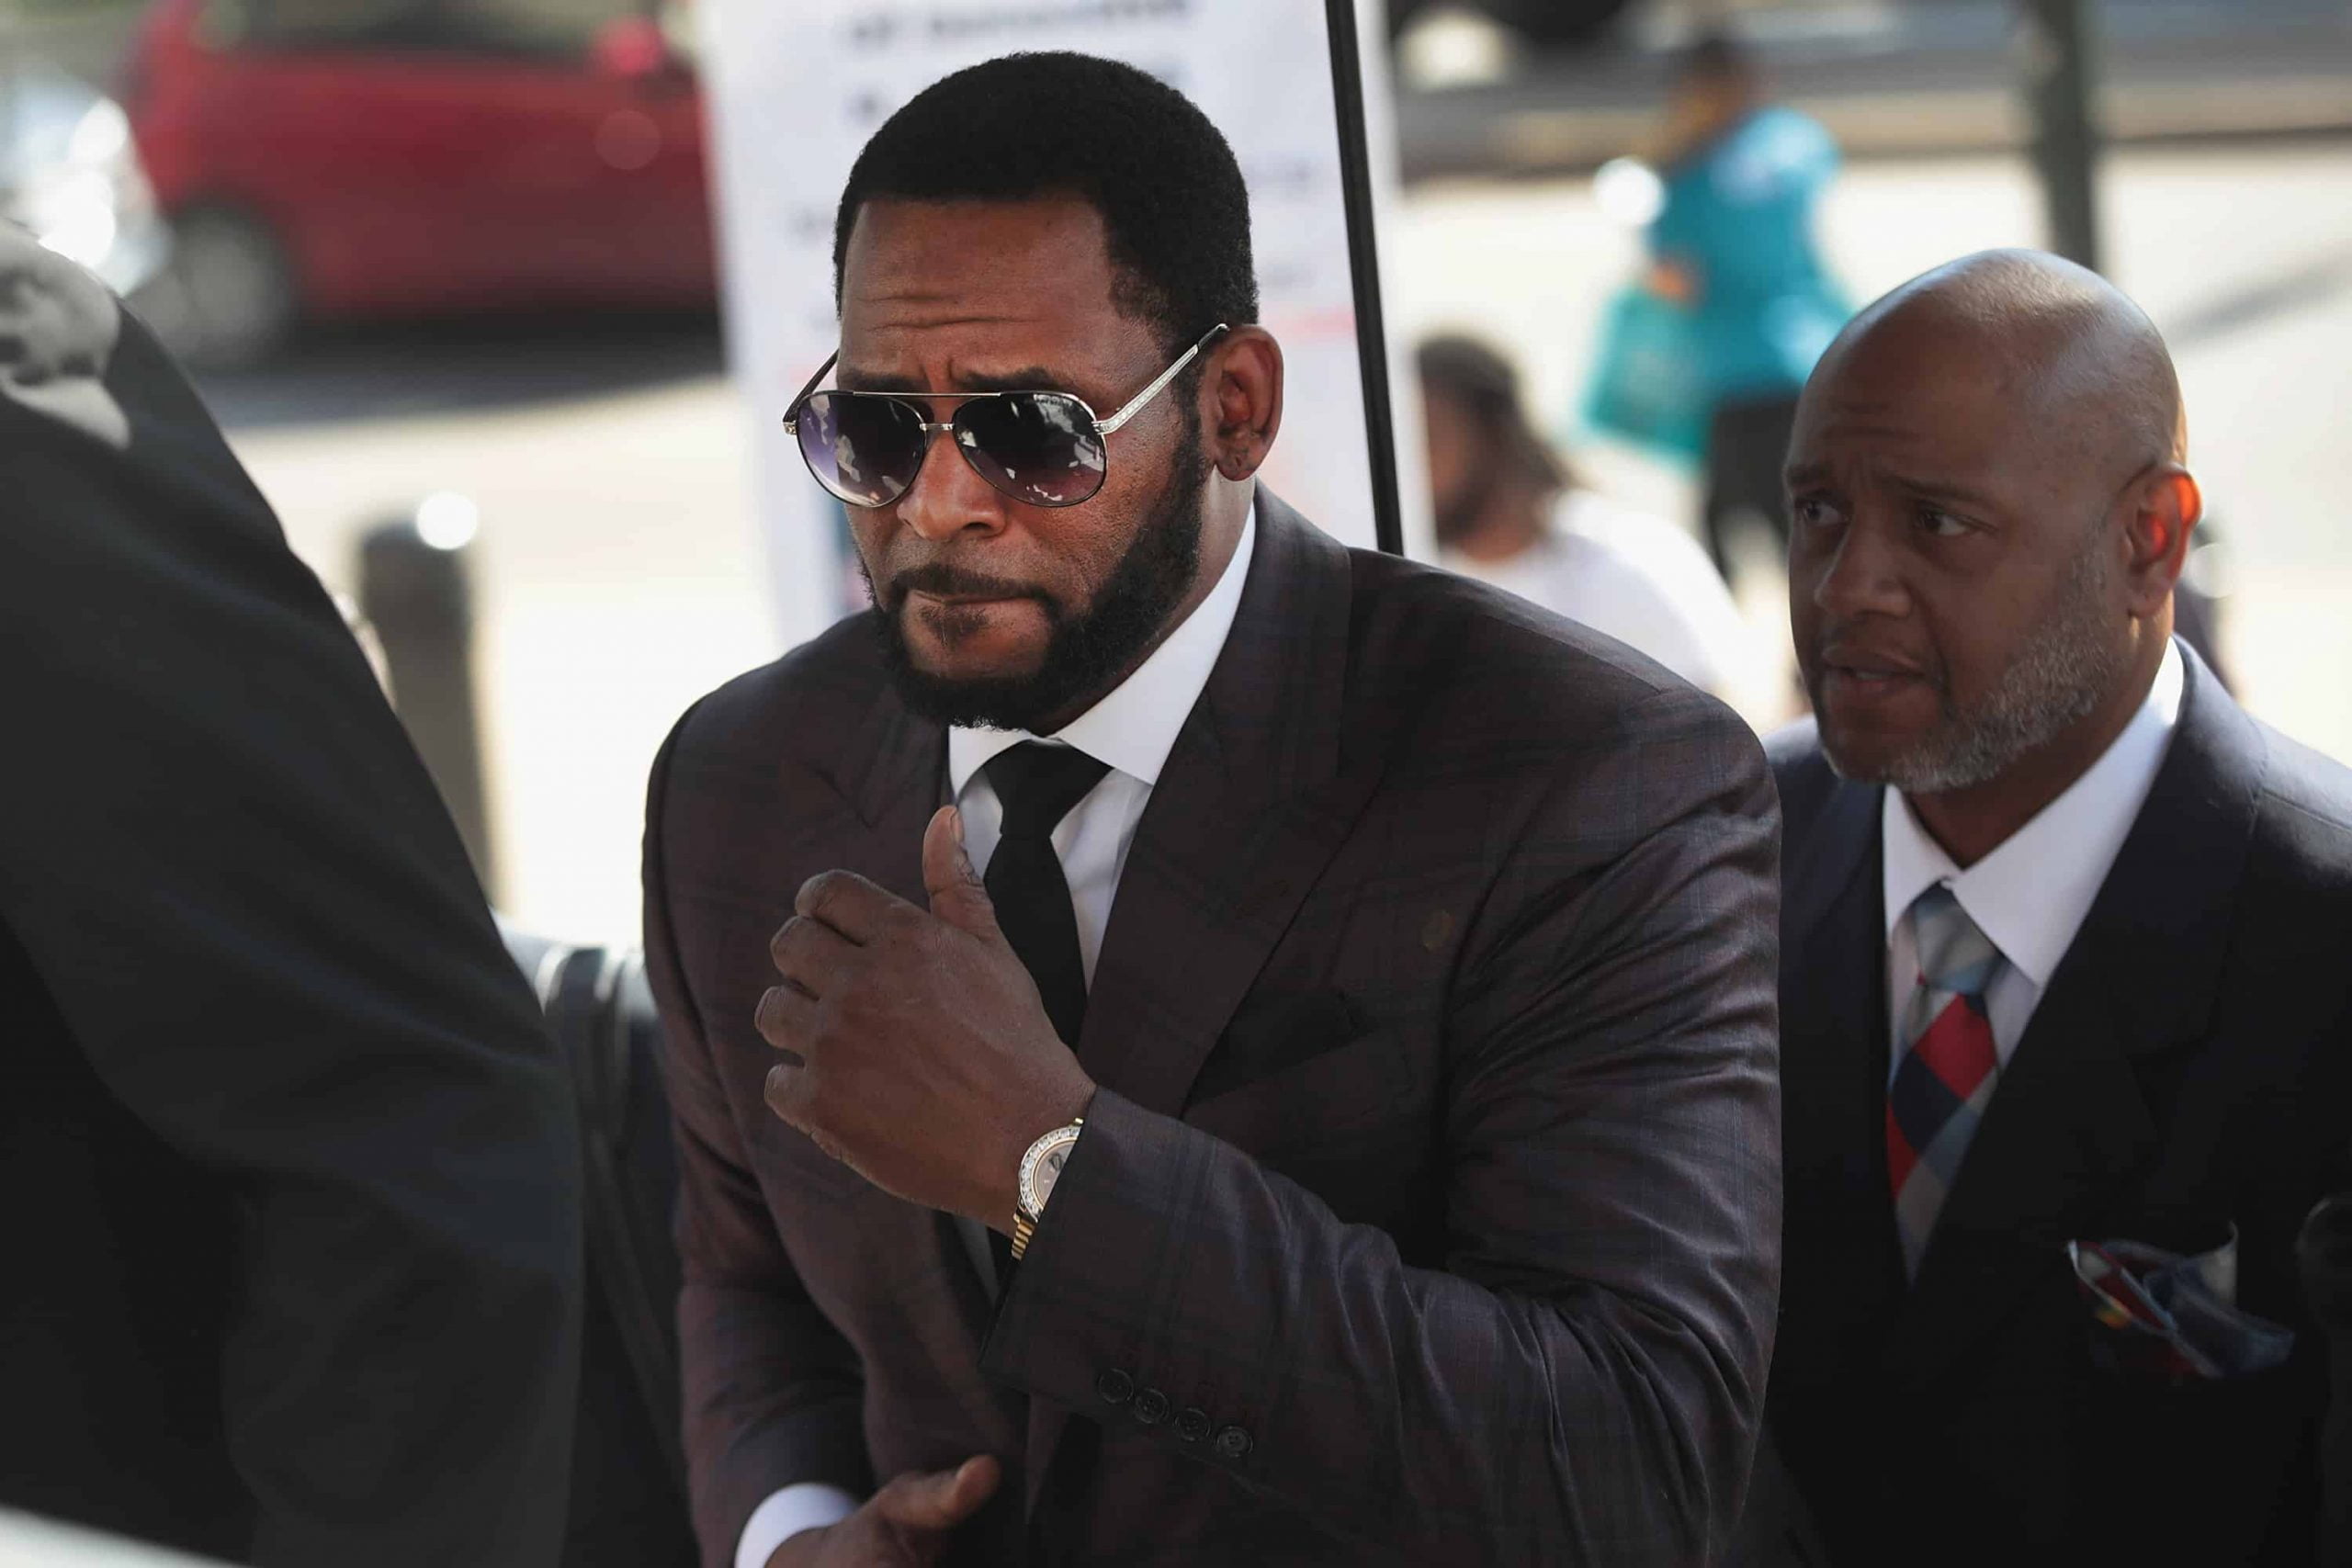 R. Kelly Reportedly "Petrified And Paranoid" Following Assault By A Fellow Inmate Last Month, Attorney Says He Is Afraid To Leave His Cell